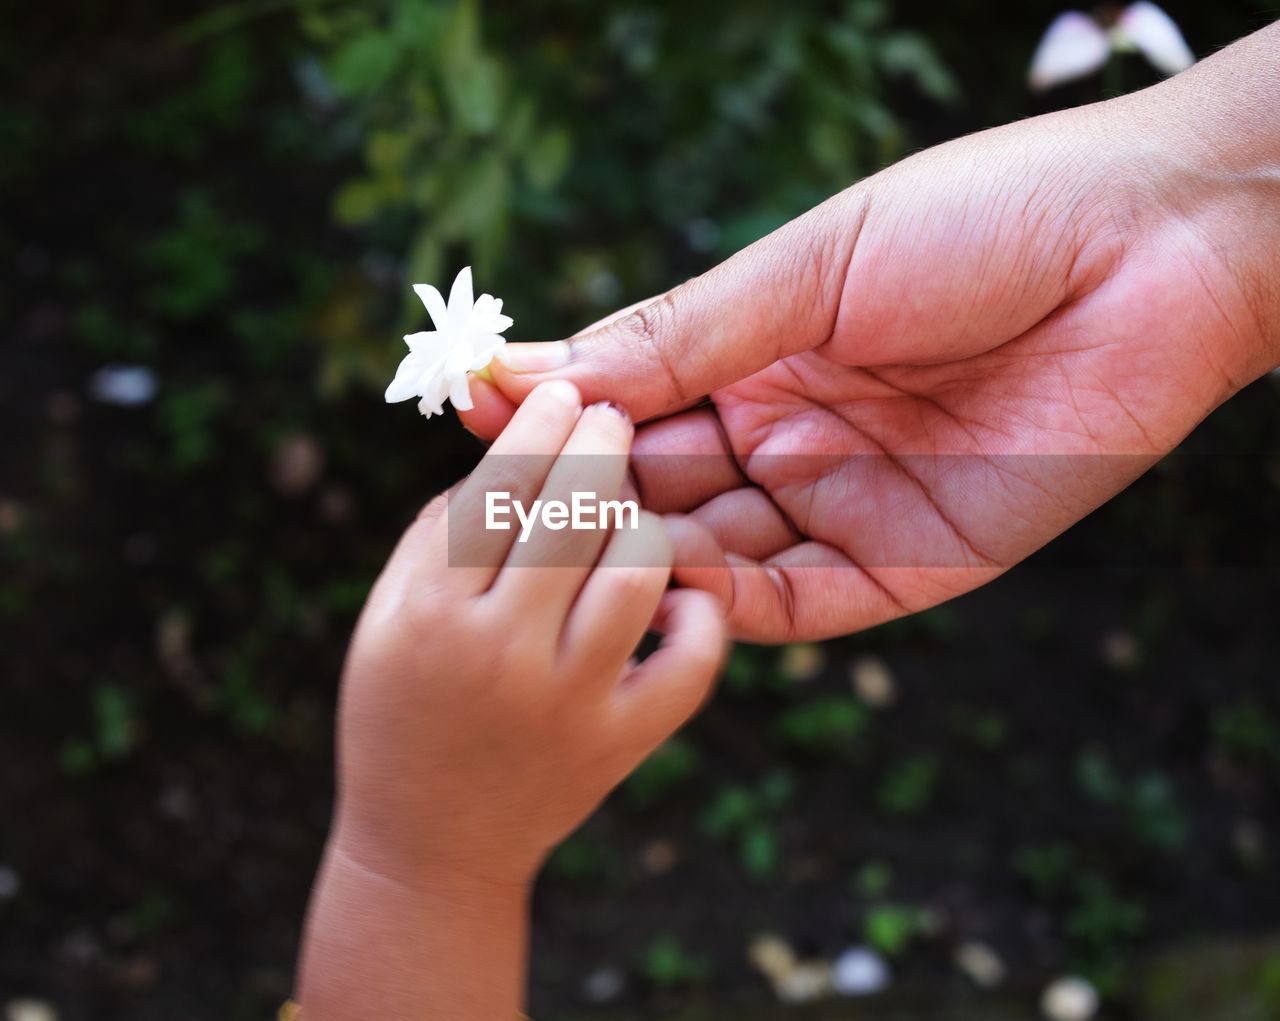 Cropped hand of parent giving white flower to child against plants